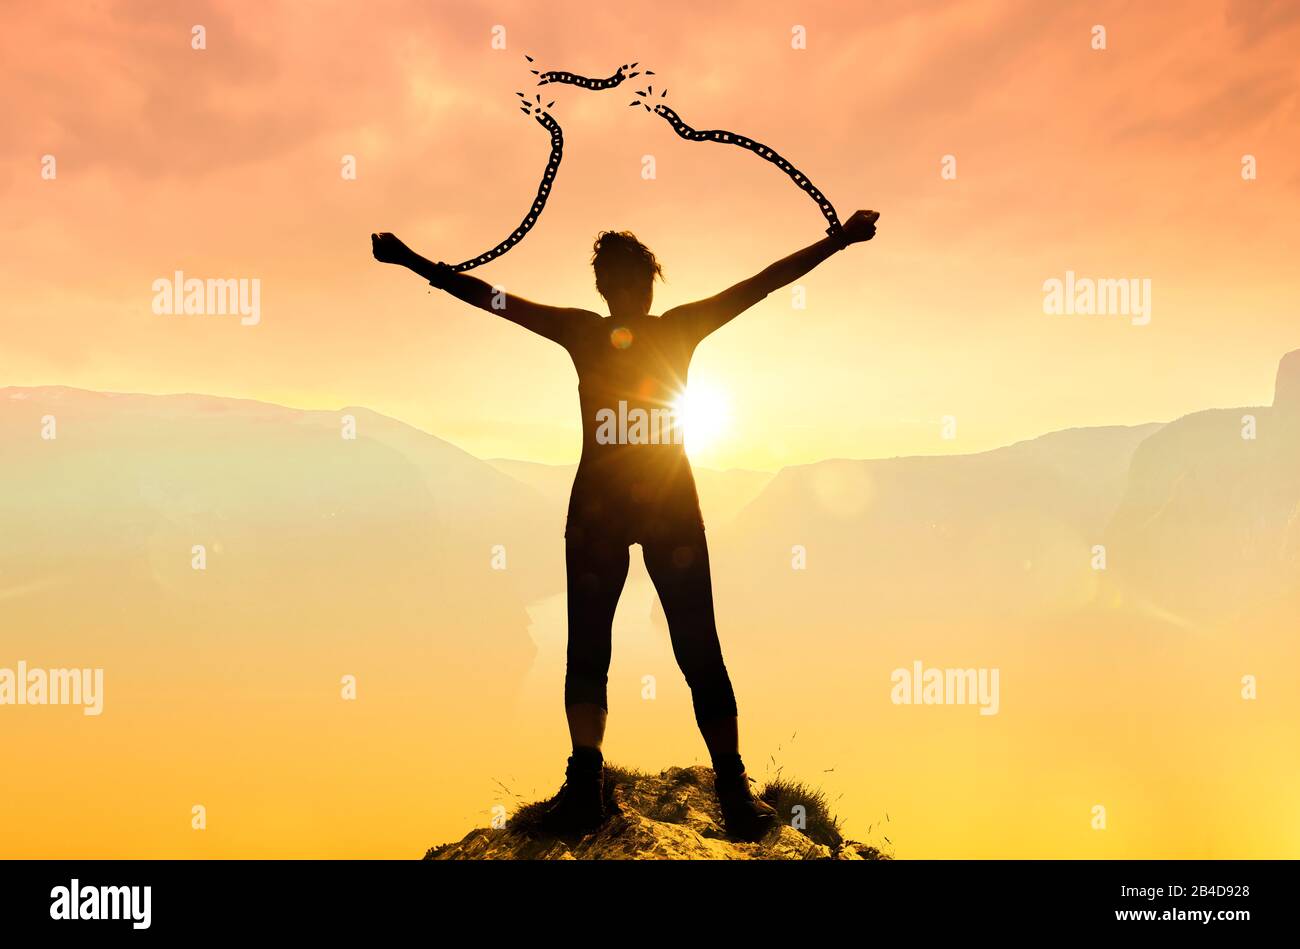 Silhoutte of a woman with broken chains Stock Photo